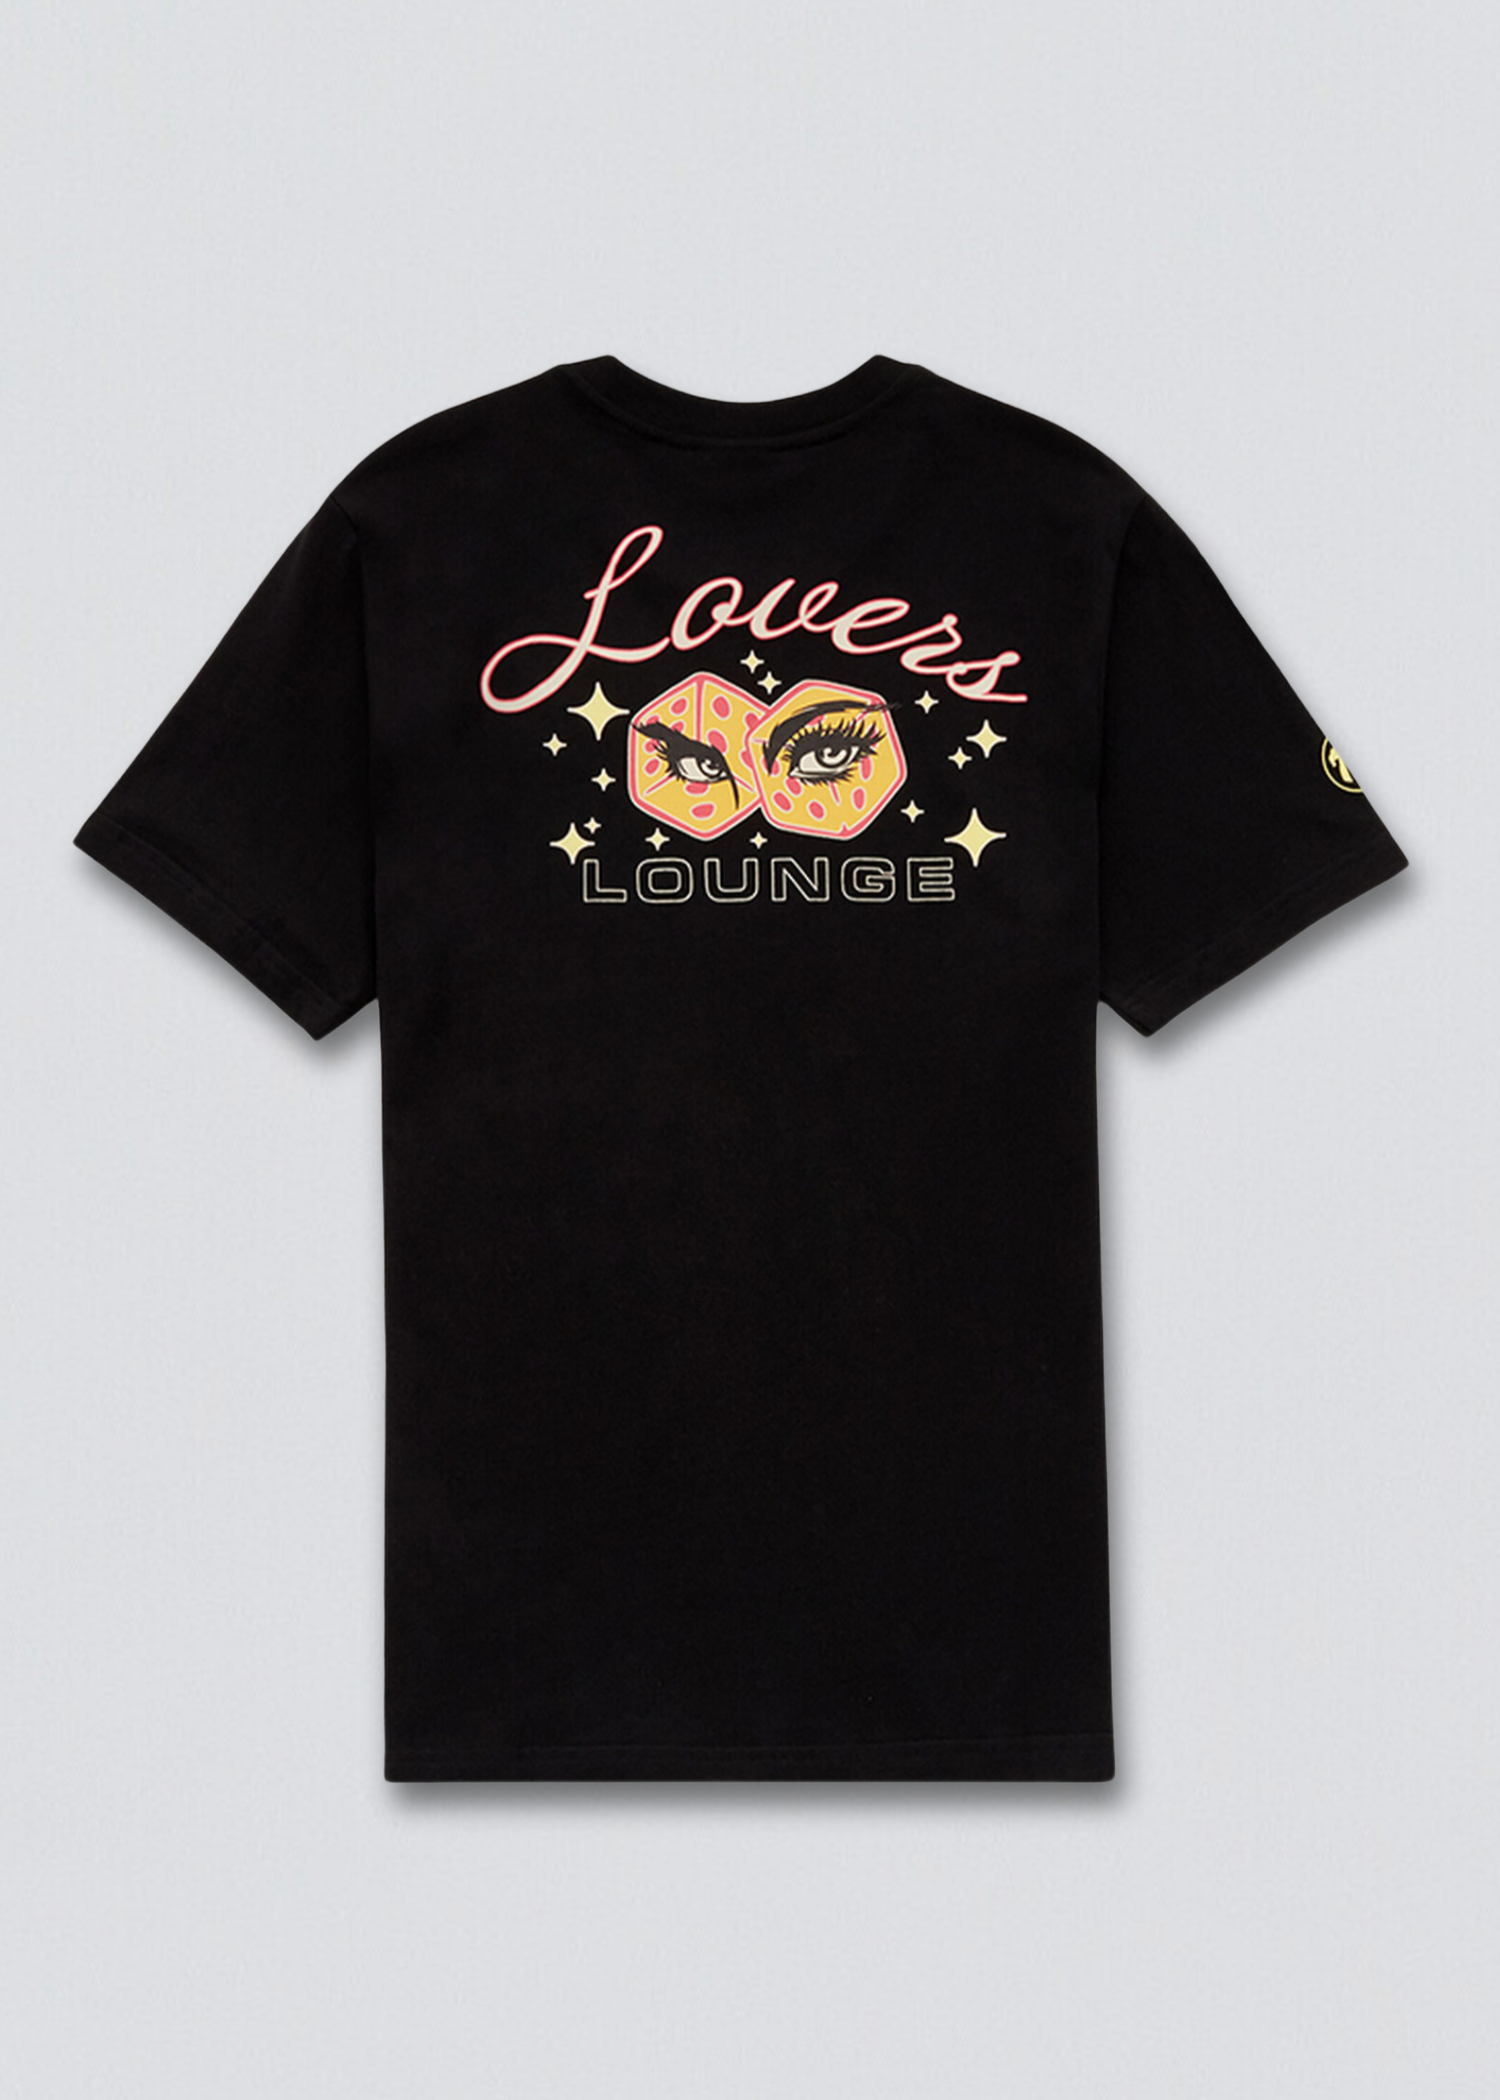 Lovers Lounge Short Sleeve Graphic Tee